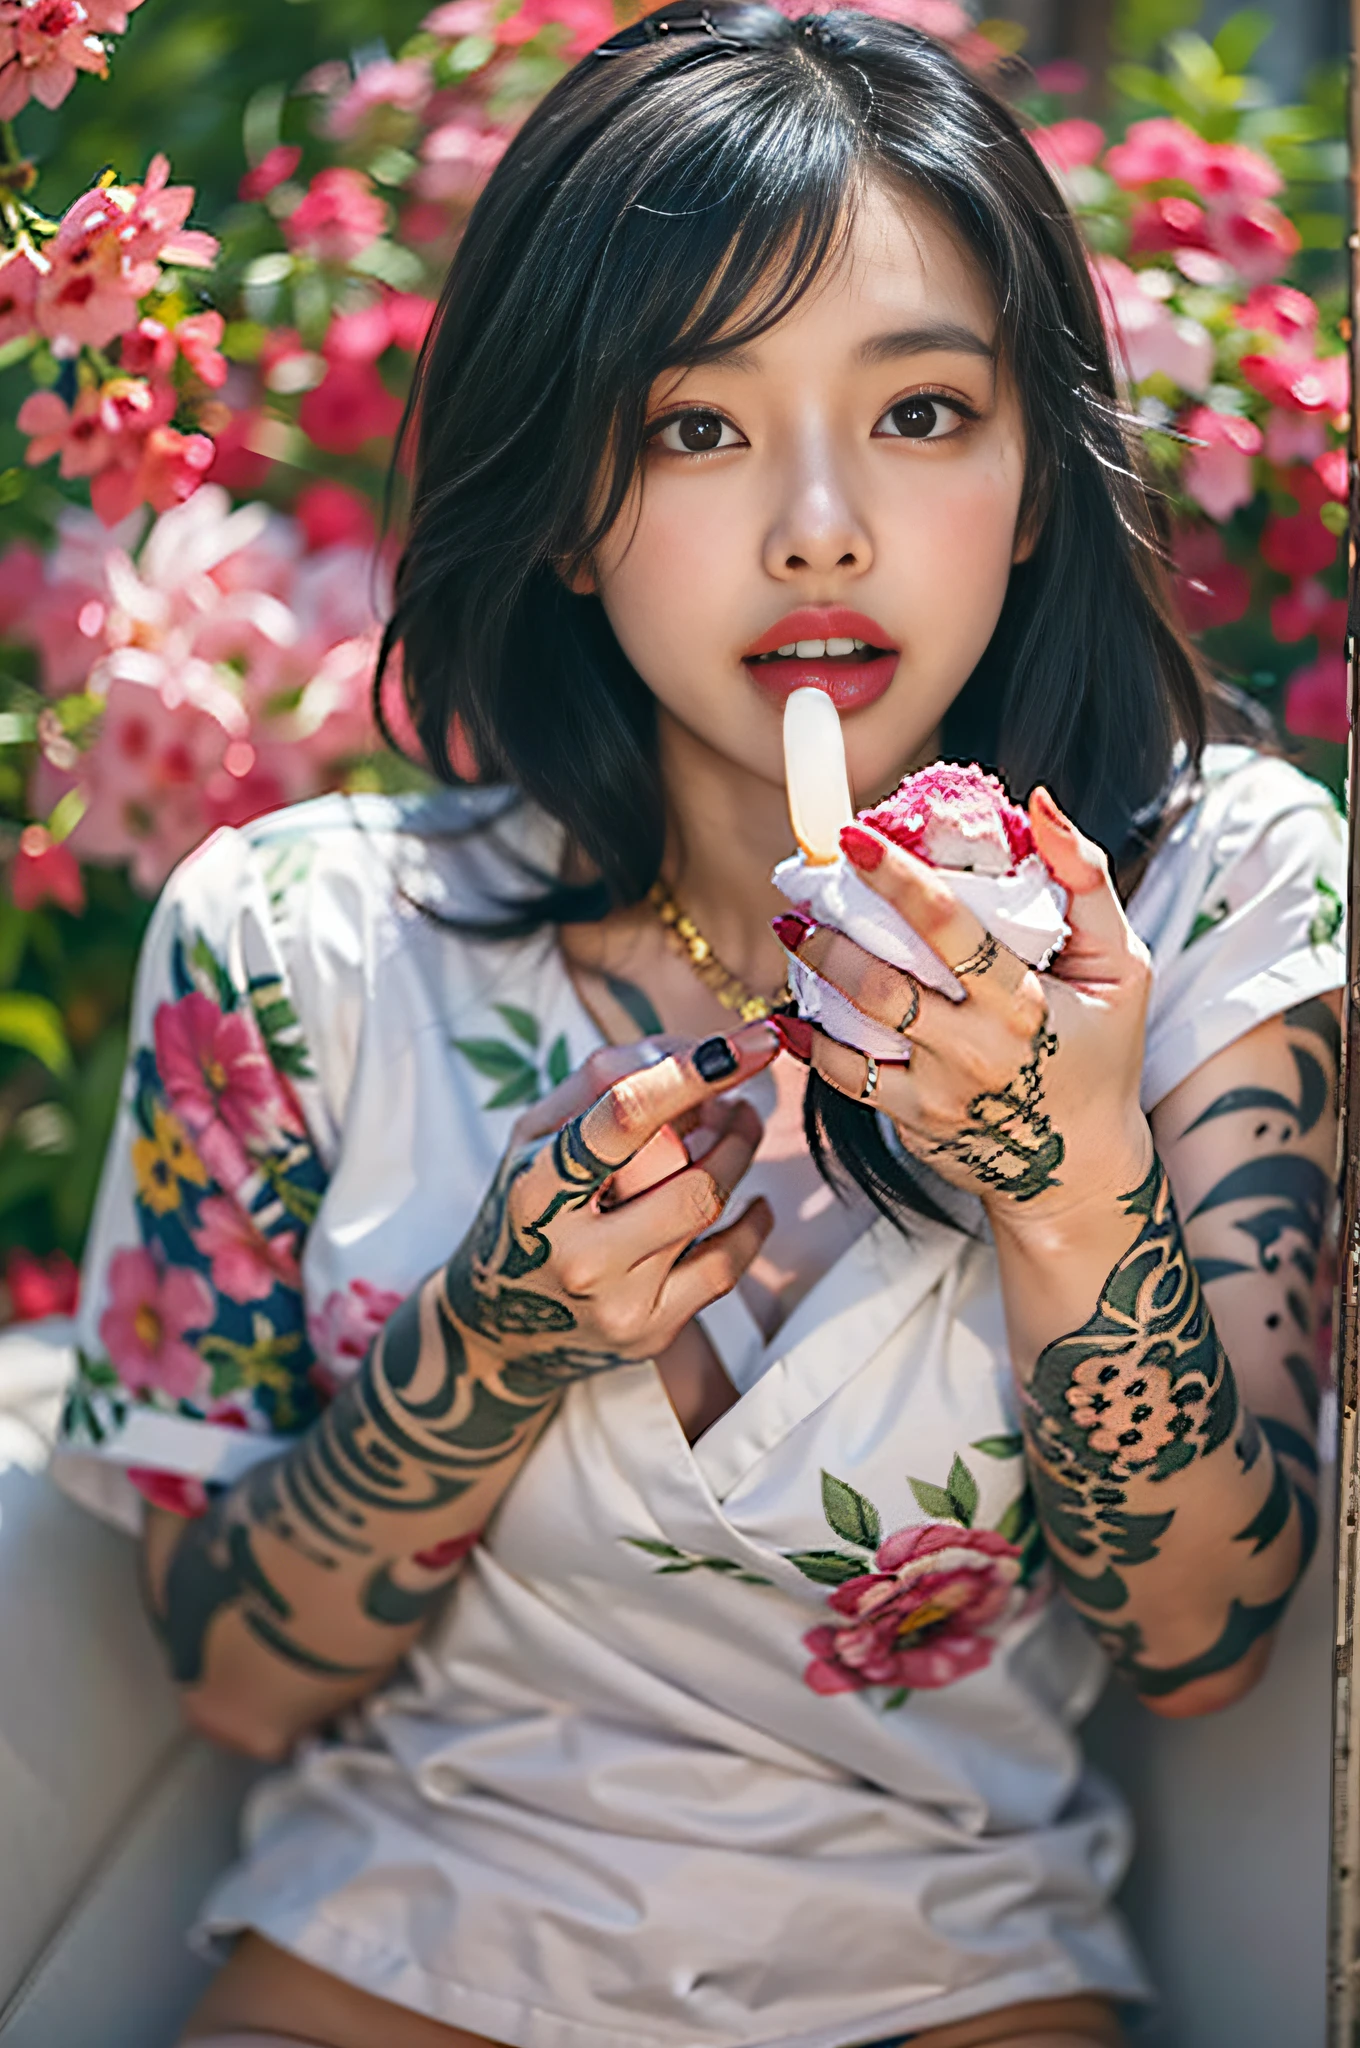 Mixed Asian sexy beauty,Tattoos on hands full of flowers,Sexy expression,Lick the ice cream on your hand